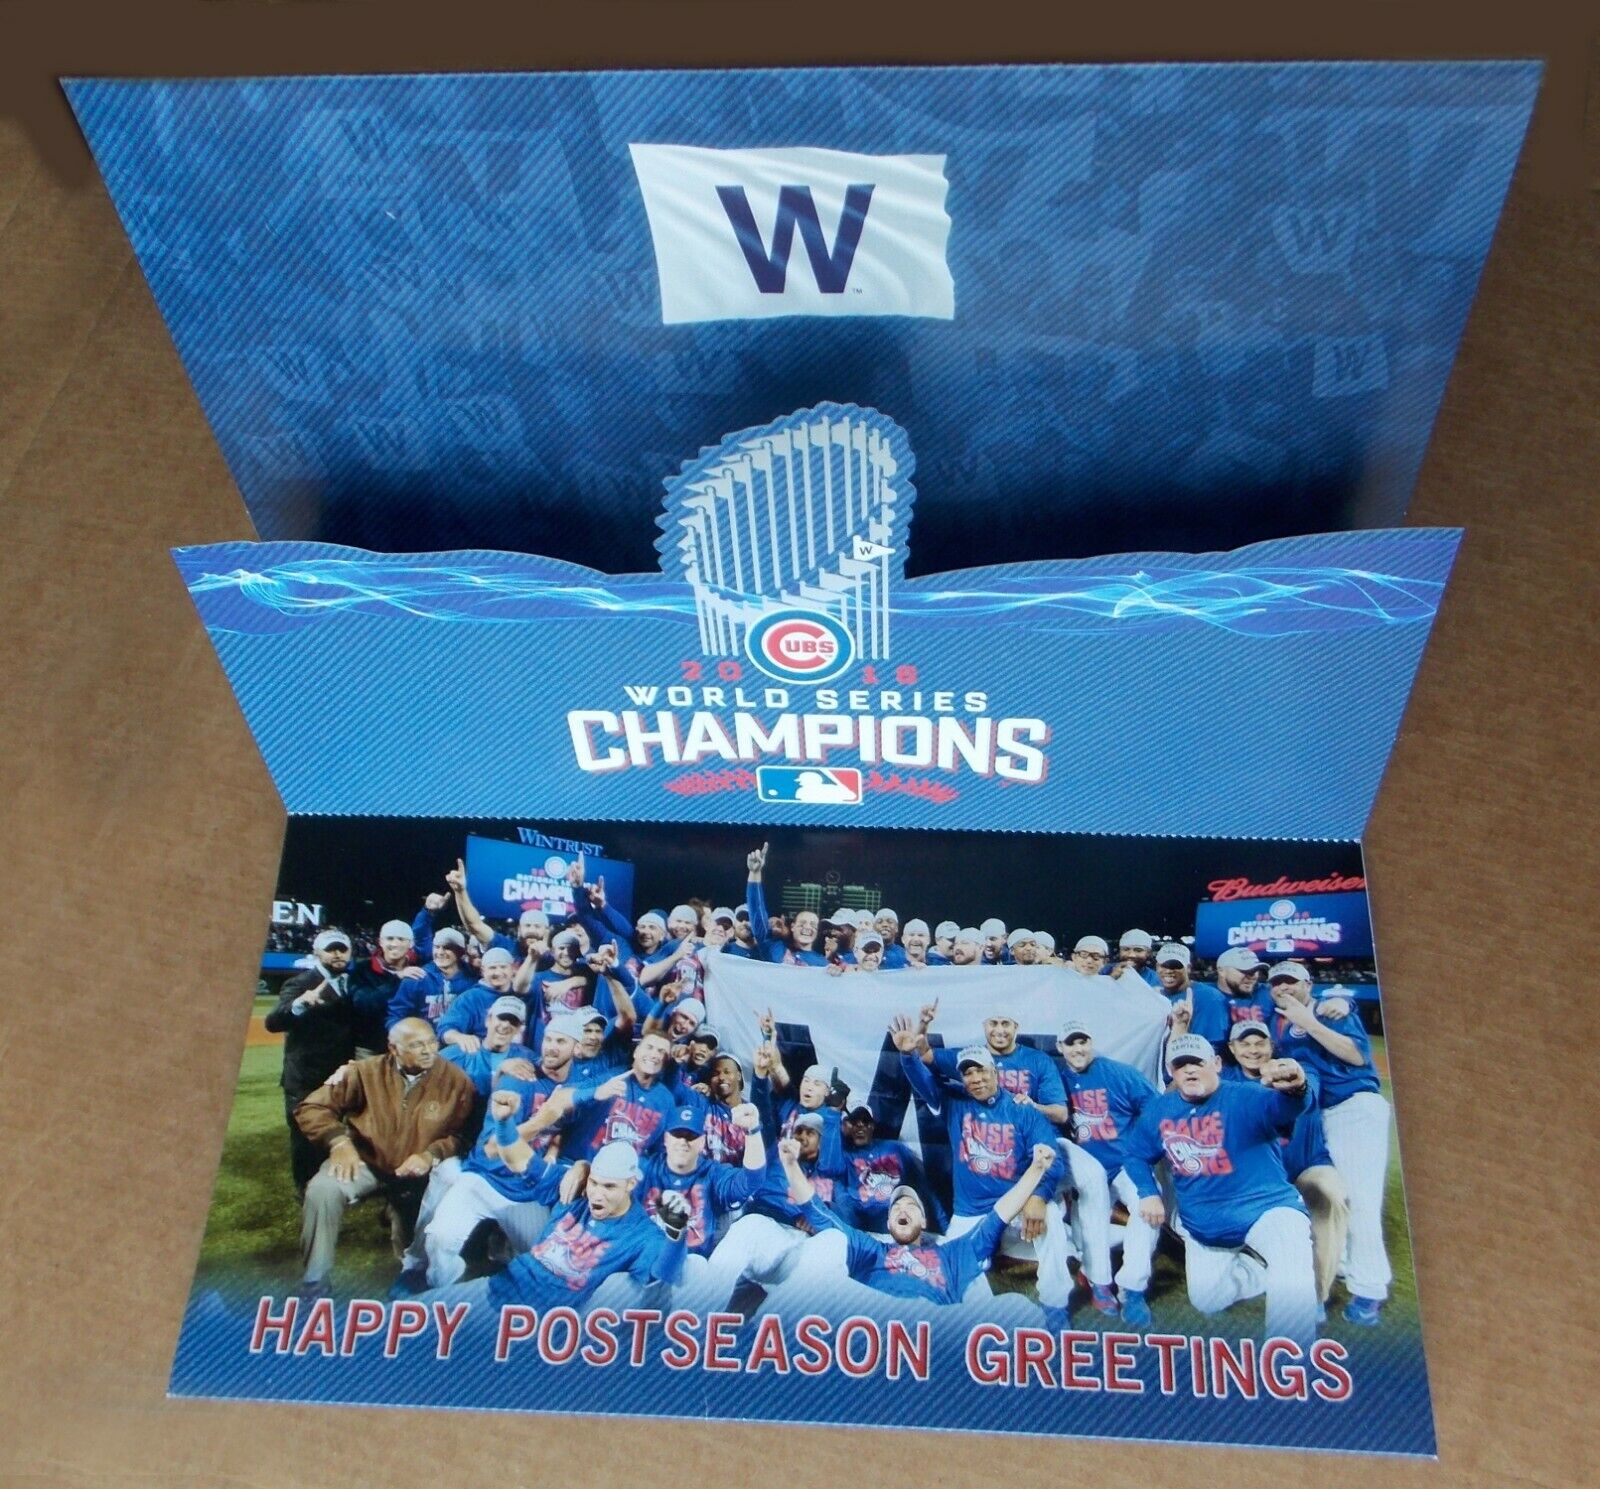 2016 Chicago Cubs Baseball STH -- 3D CHRISTMAS CARD -- WORLD SERIES CHAMPIONS